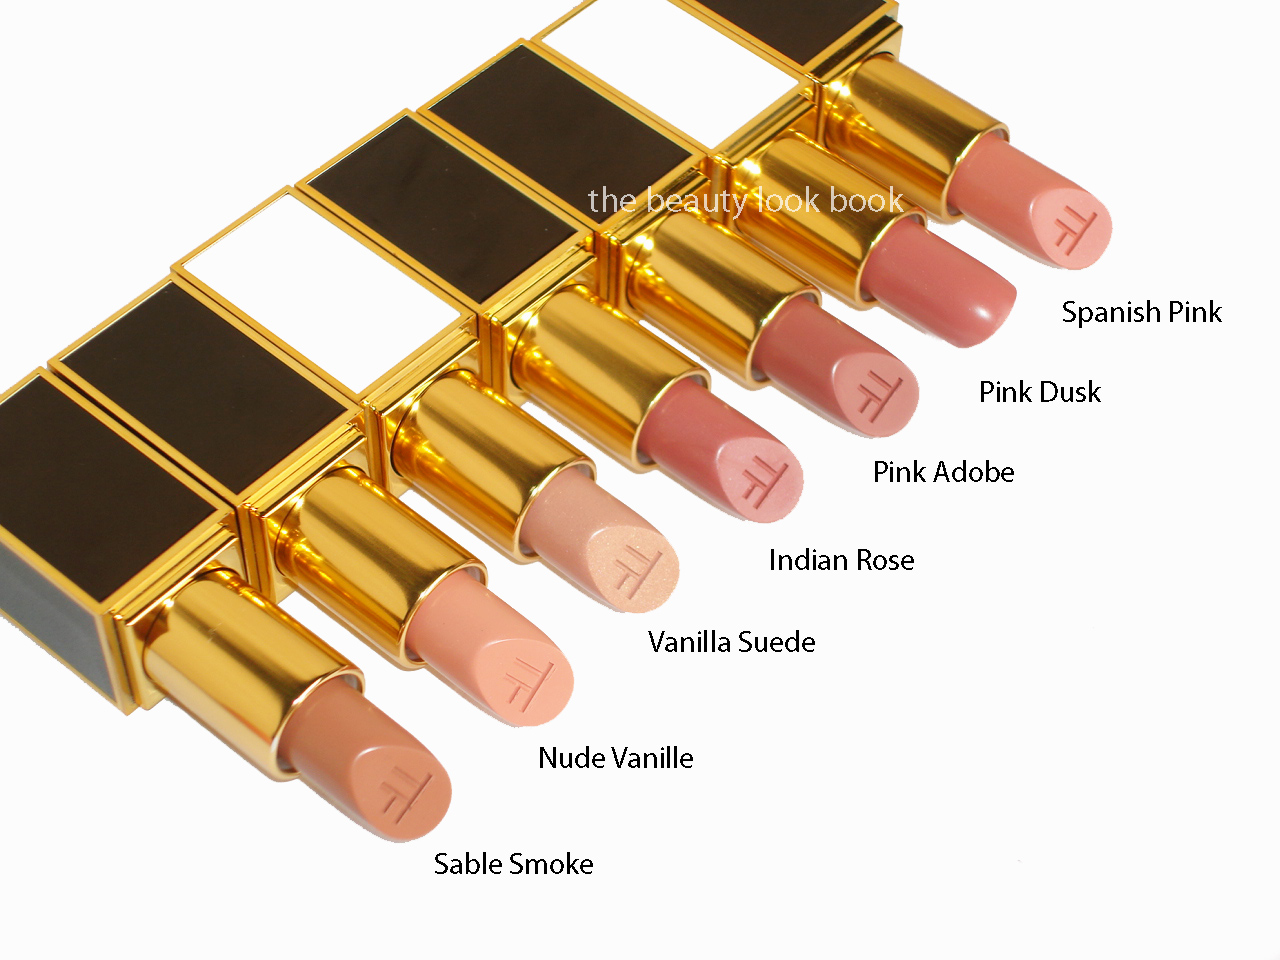 Tom Ford & Nudes - The Beauty Look Book